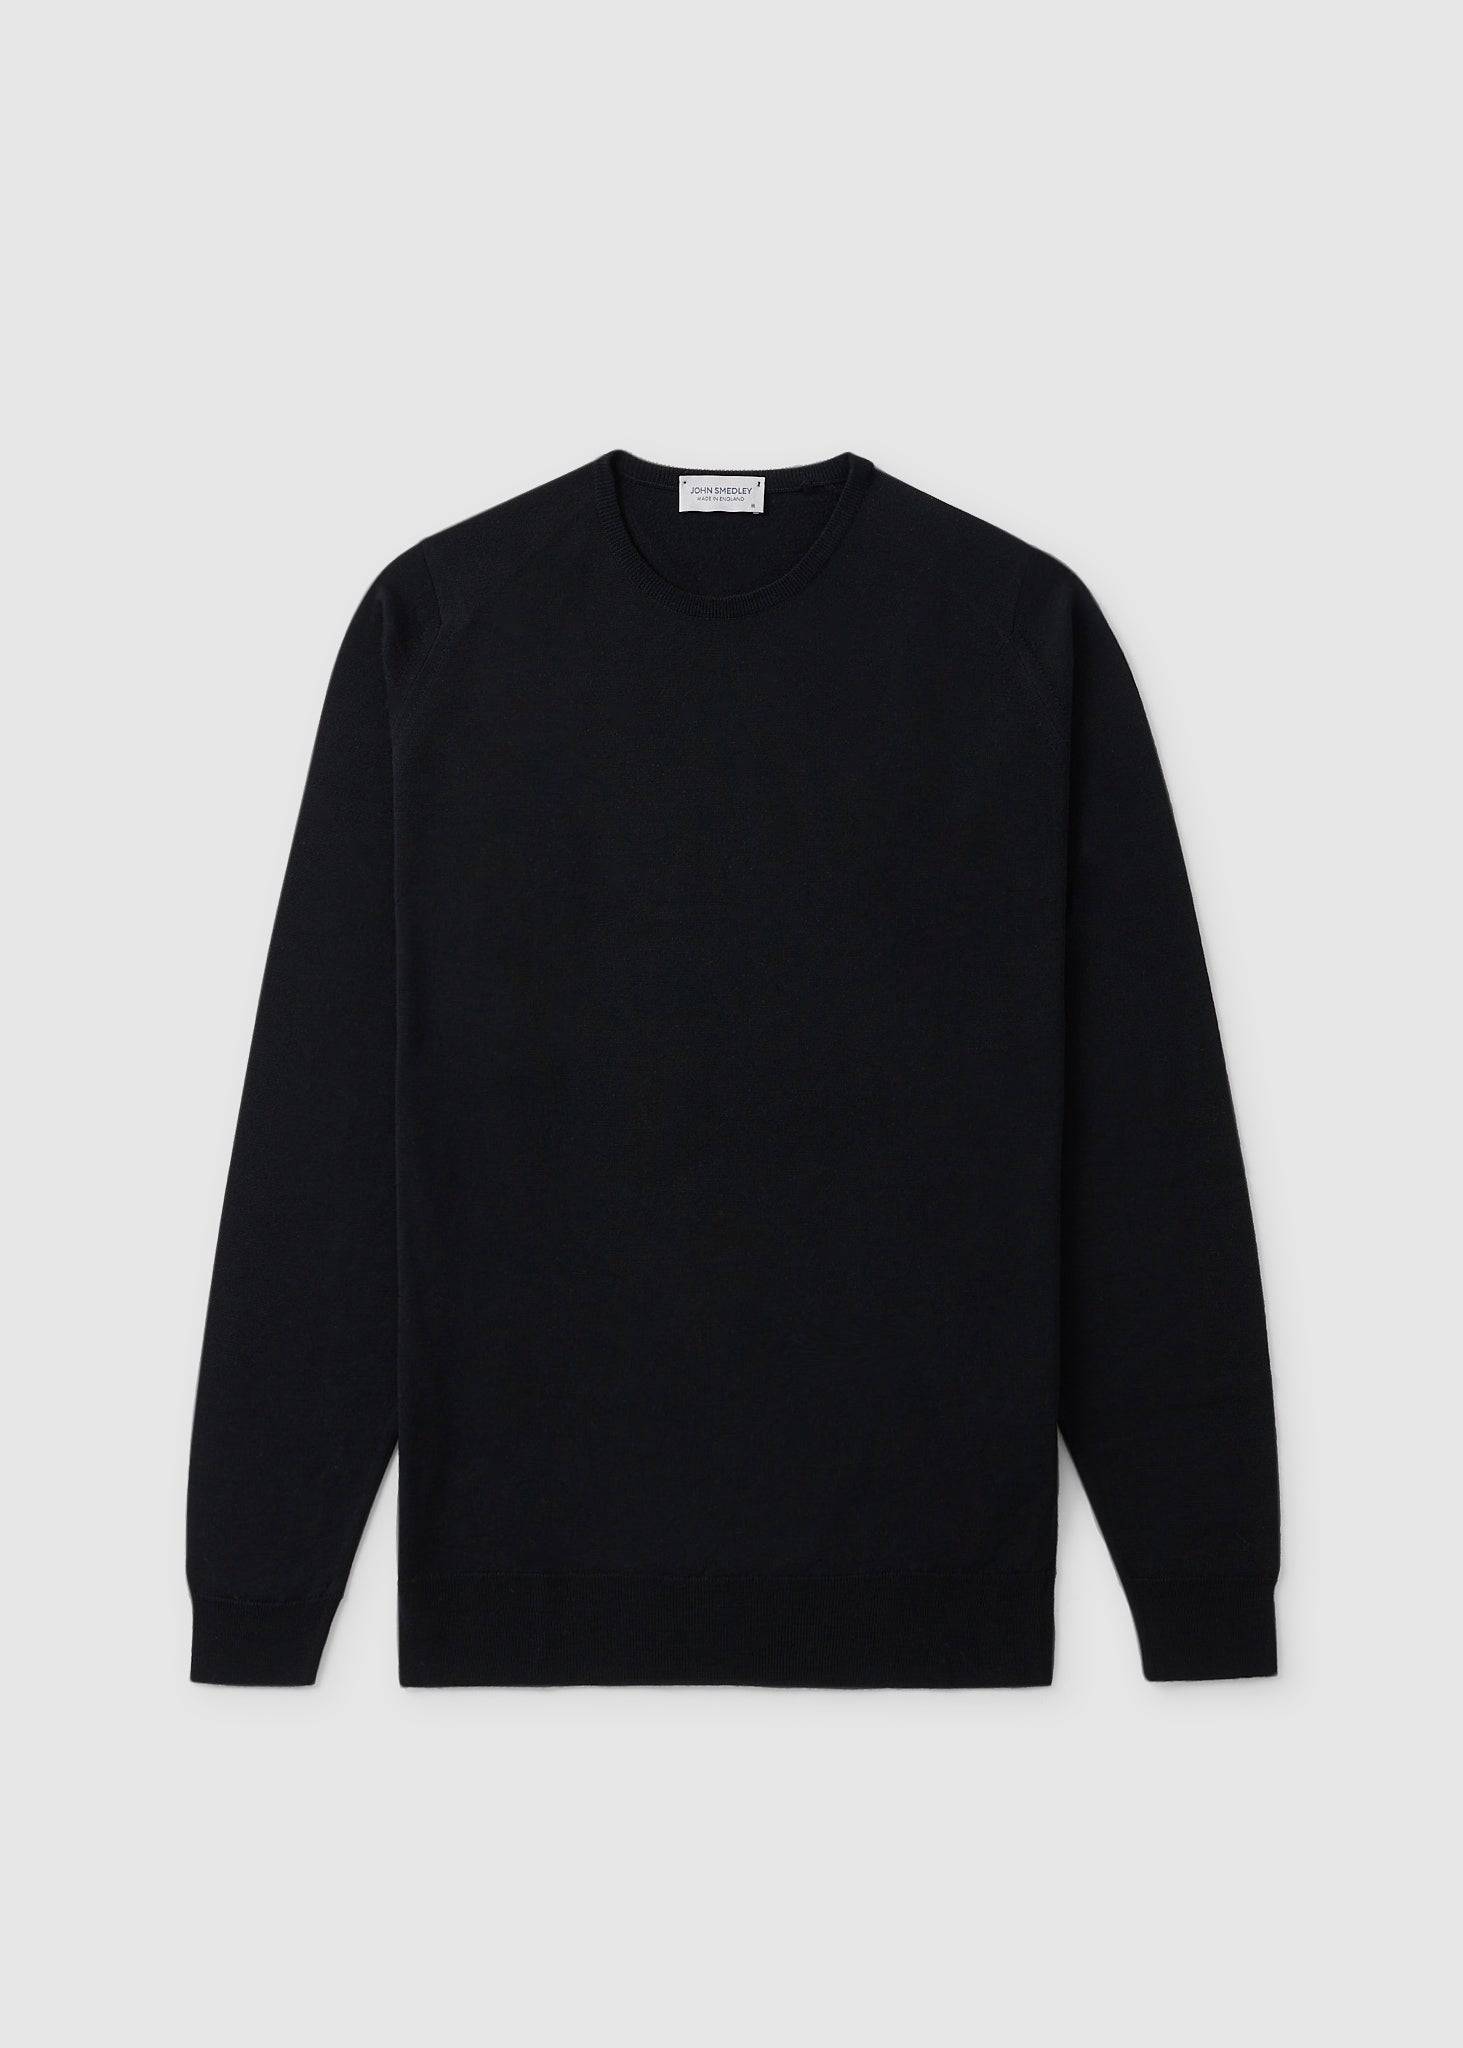 Image of John Smedley Mens Lundy Pullover Sweatshirt In Black